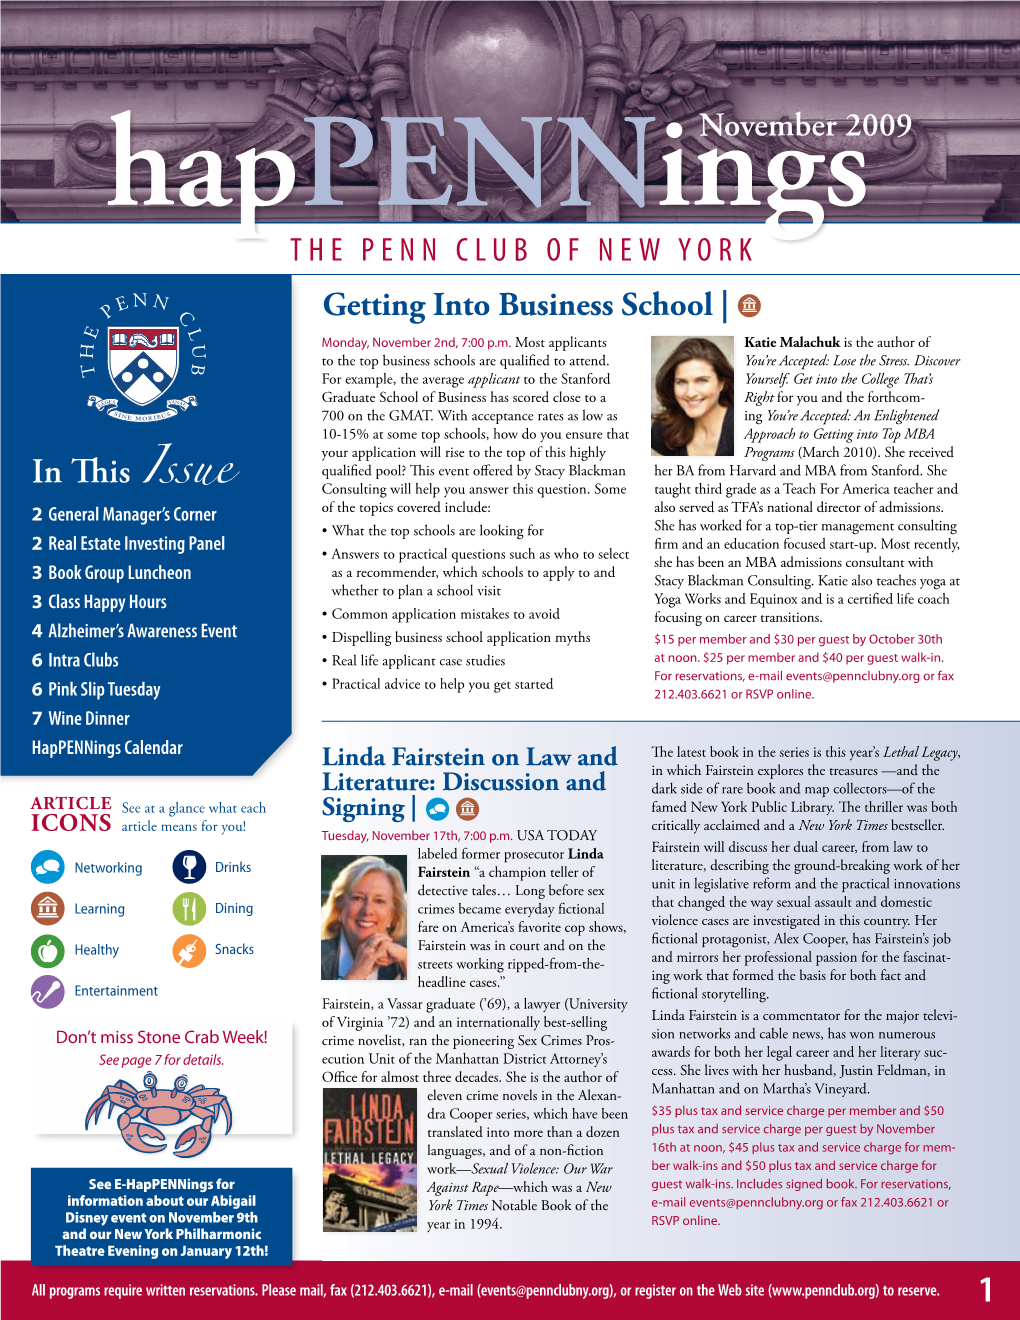 In This Issue of Happennings As Well As in Our Club During This Busy Season, I Encourage You to Make On-Line Newsletter, E-Happennings